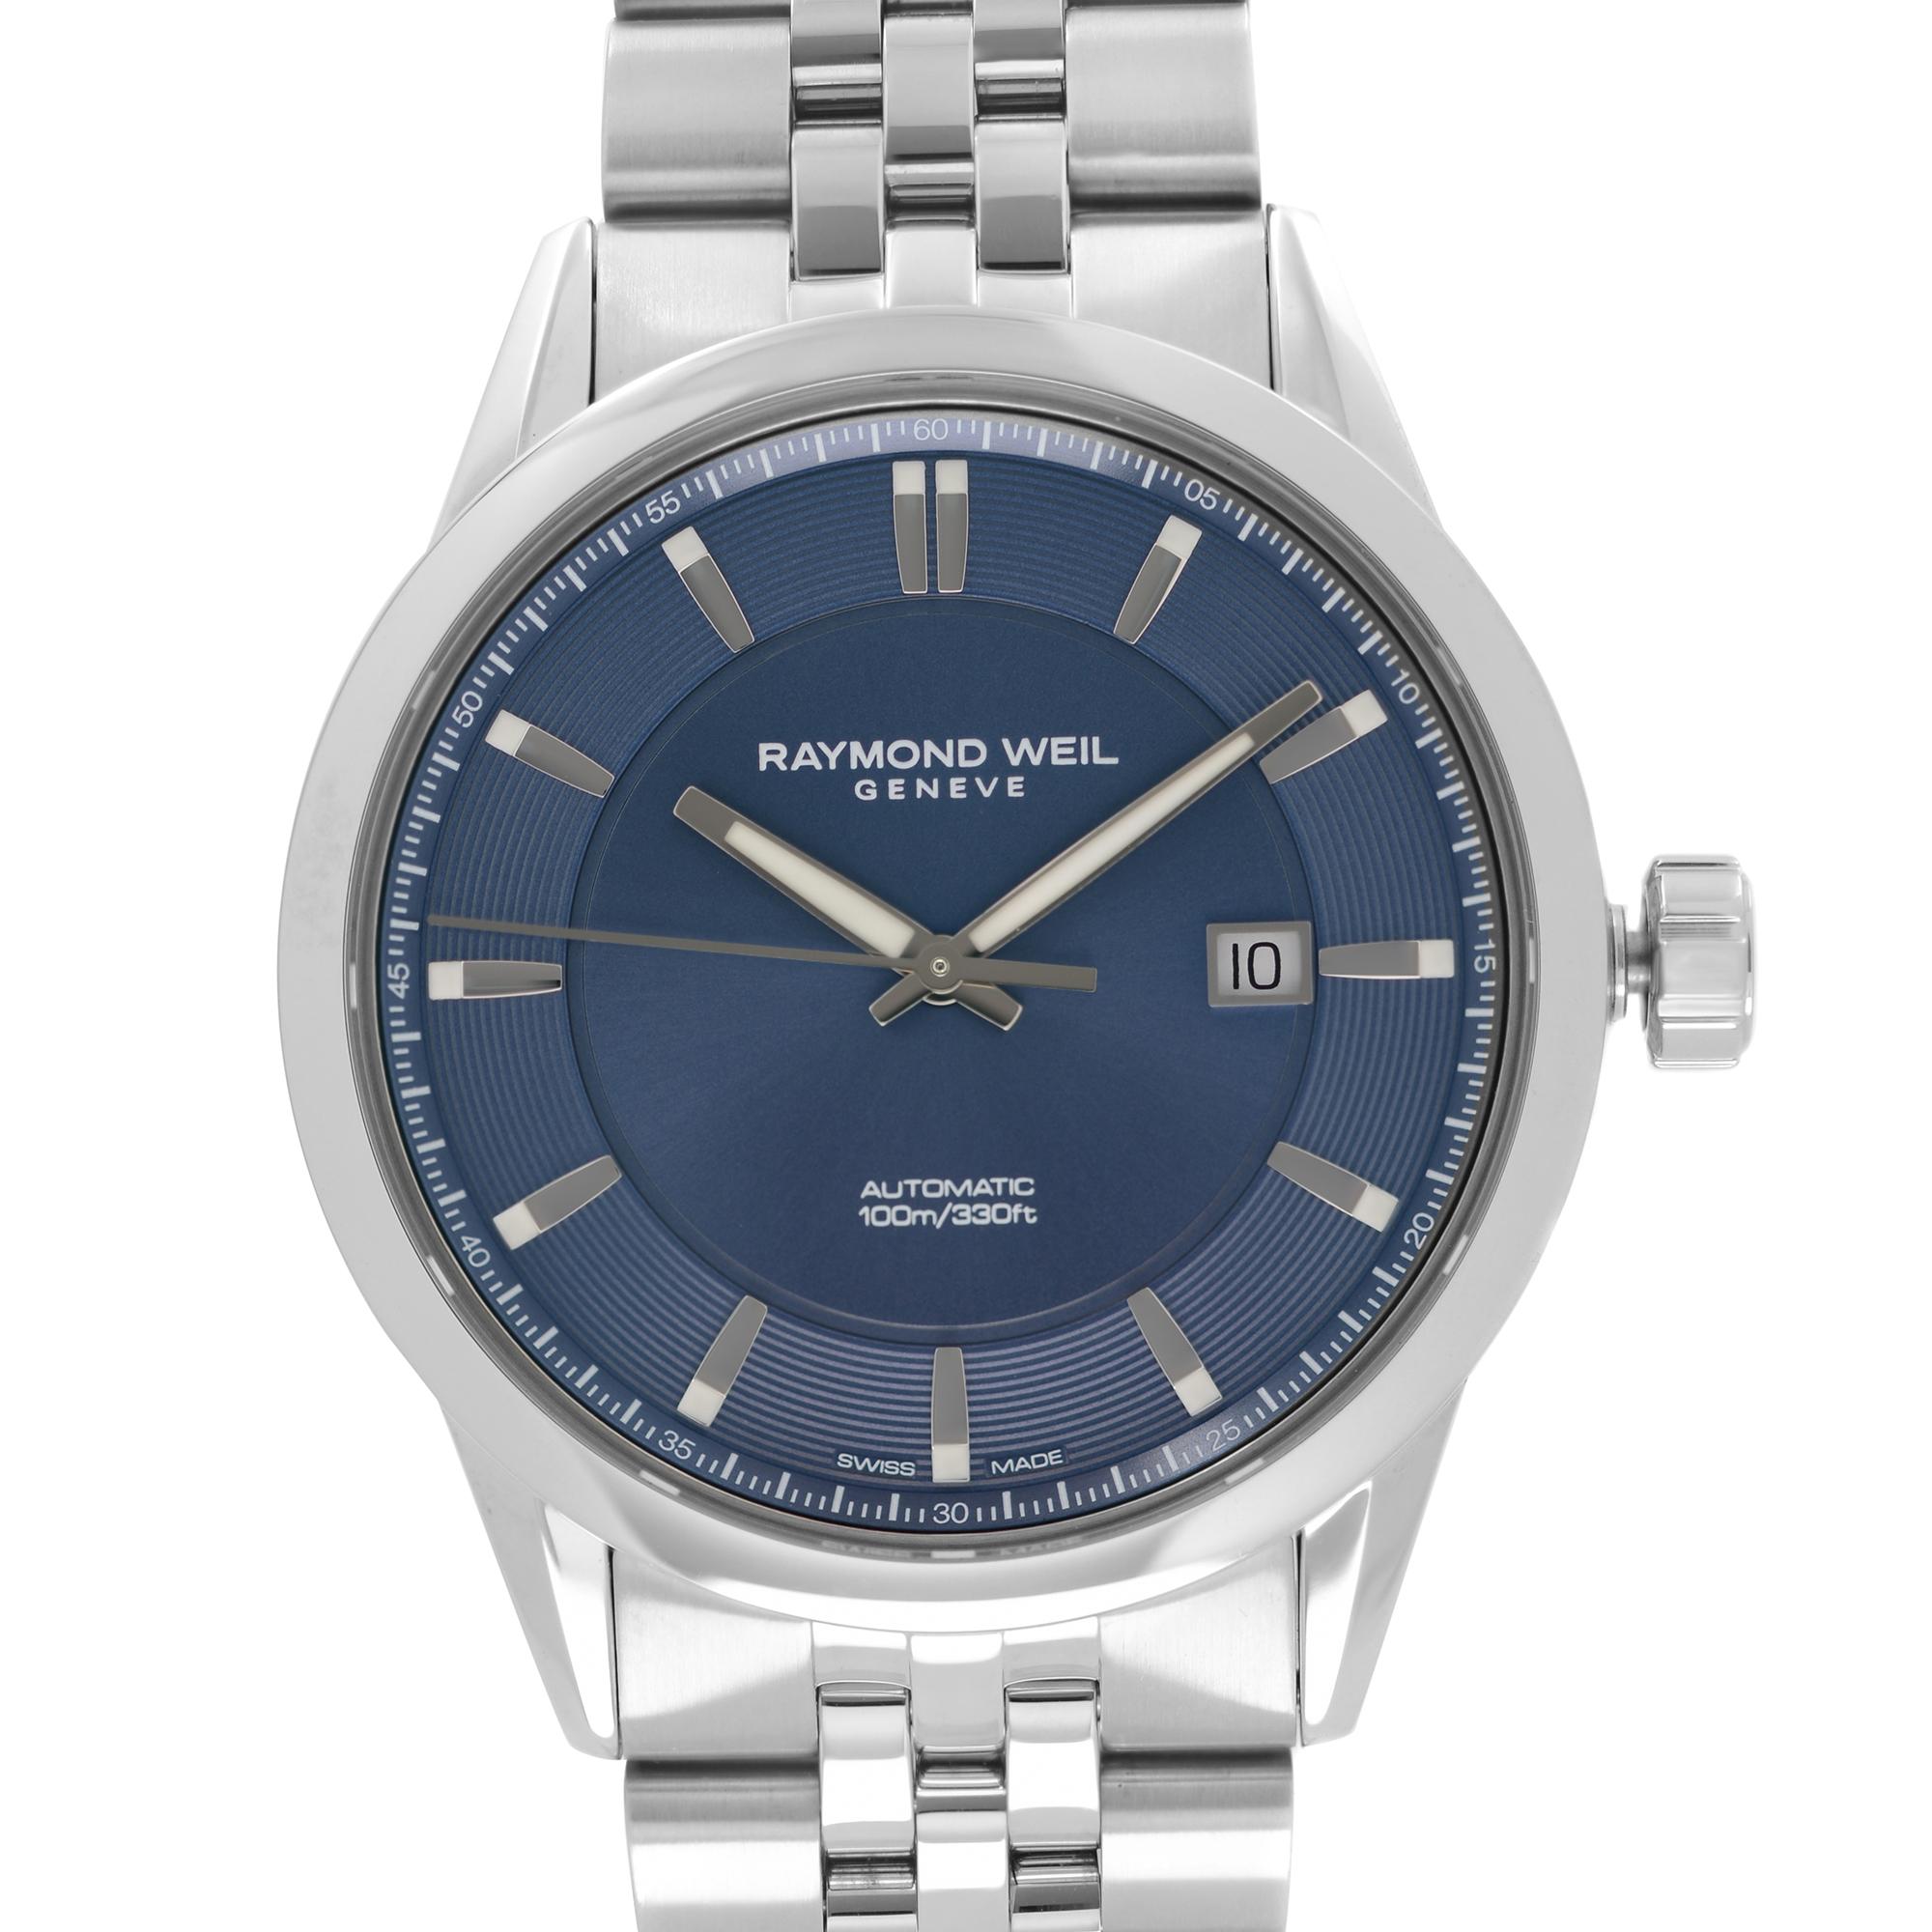 Unworn Raymond Weil Freelancer Steel Blue Dial Automatic Men's Watch. This Beautiful Timepiece Features: Stainless Steel Case and Bracelet, Fixed Stainless Steel Bezel, Blue Dial with Luminous Grey Hands, And Index Hour Markers. Original Box and